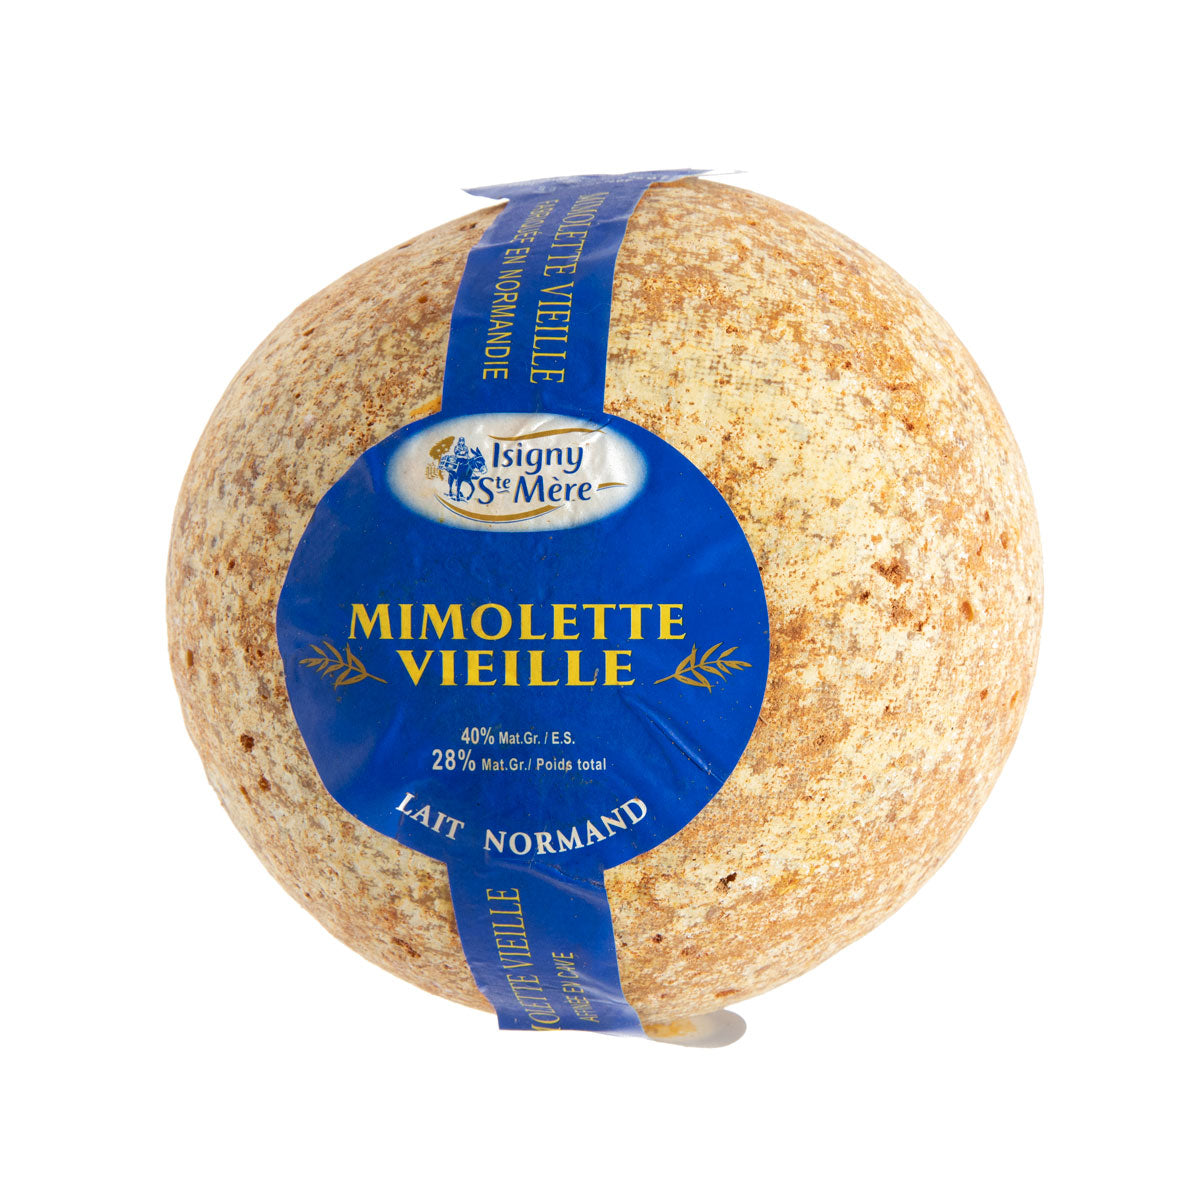 Isigny Sainte Mere Mimolette 12 Month Cheese